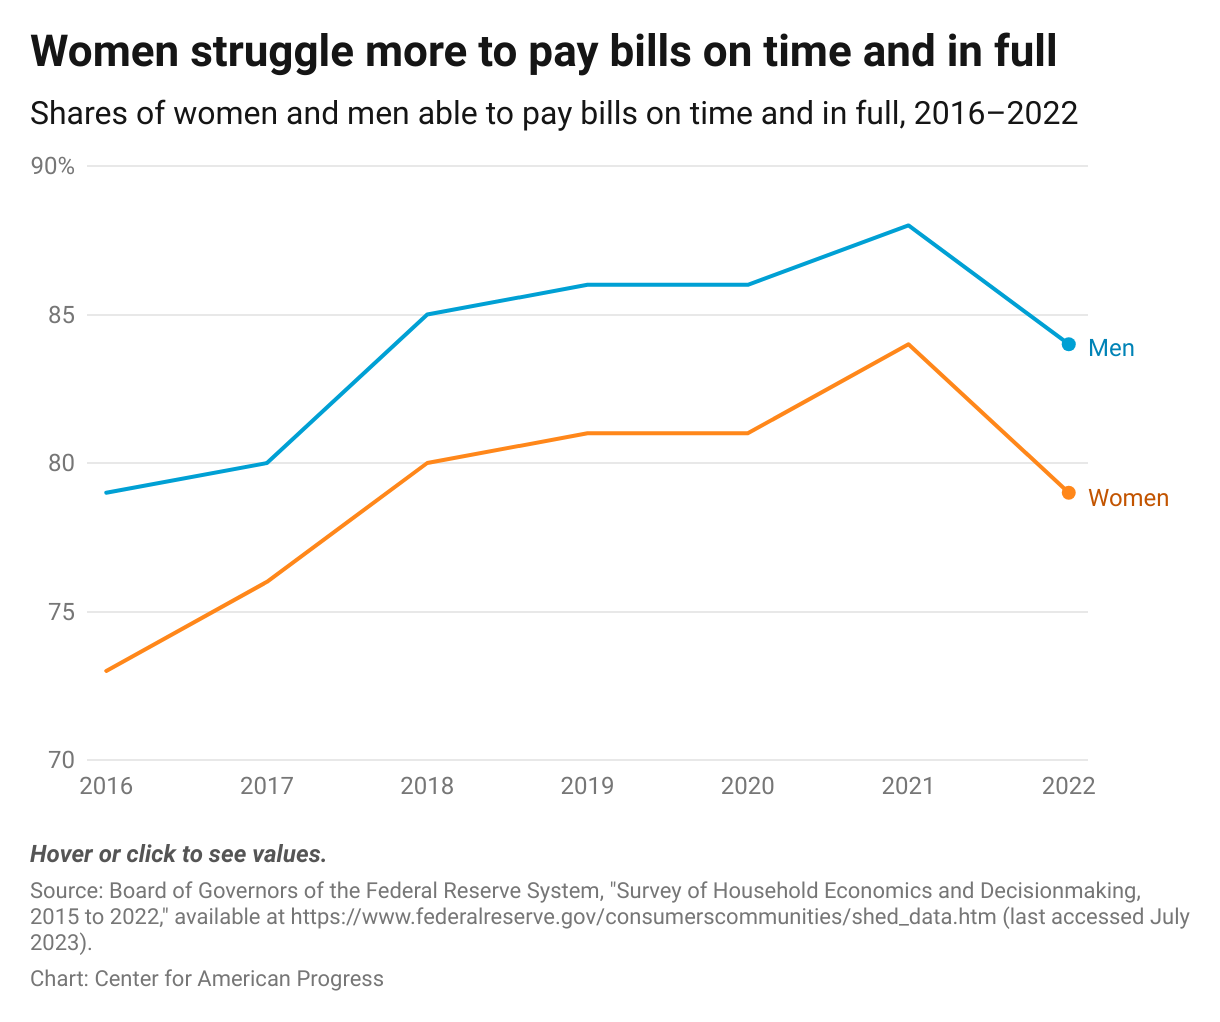 Line chart showing that women have persistently been less likely than men to be able to pay all their bills on time and in full, with rates of 79 percent for women and 84 percent for men in 2022.